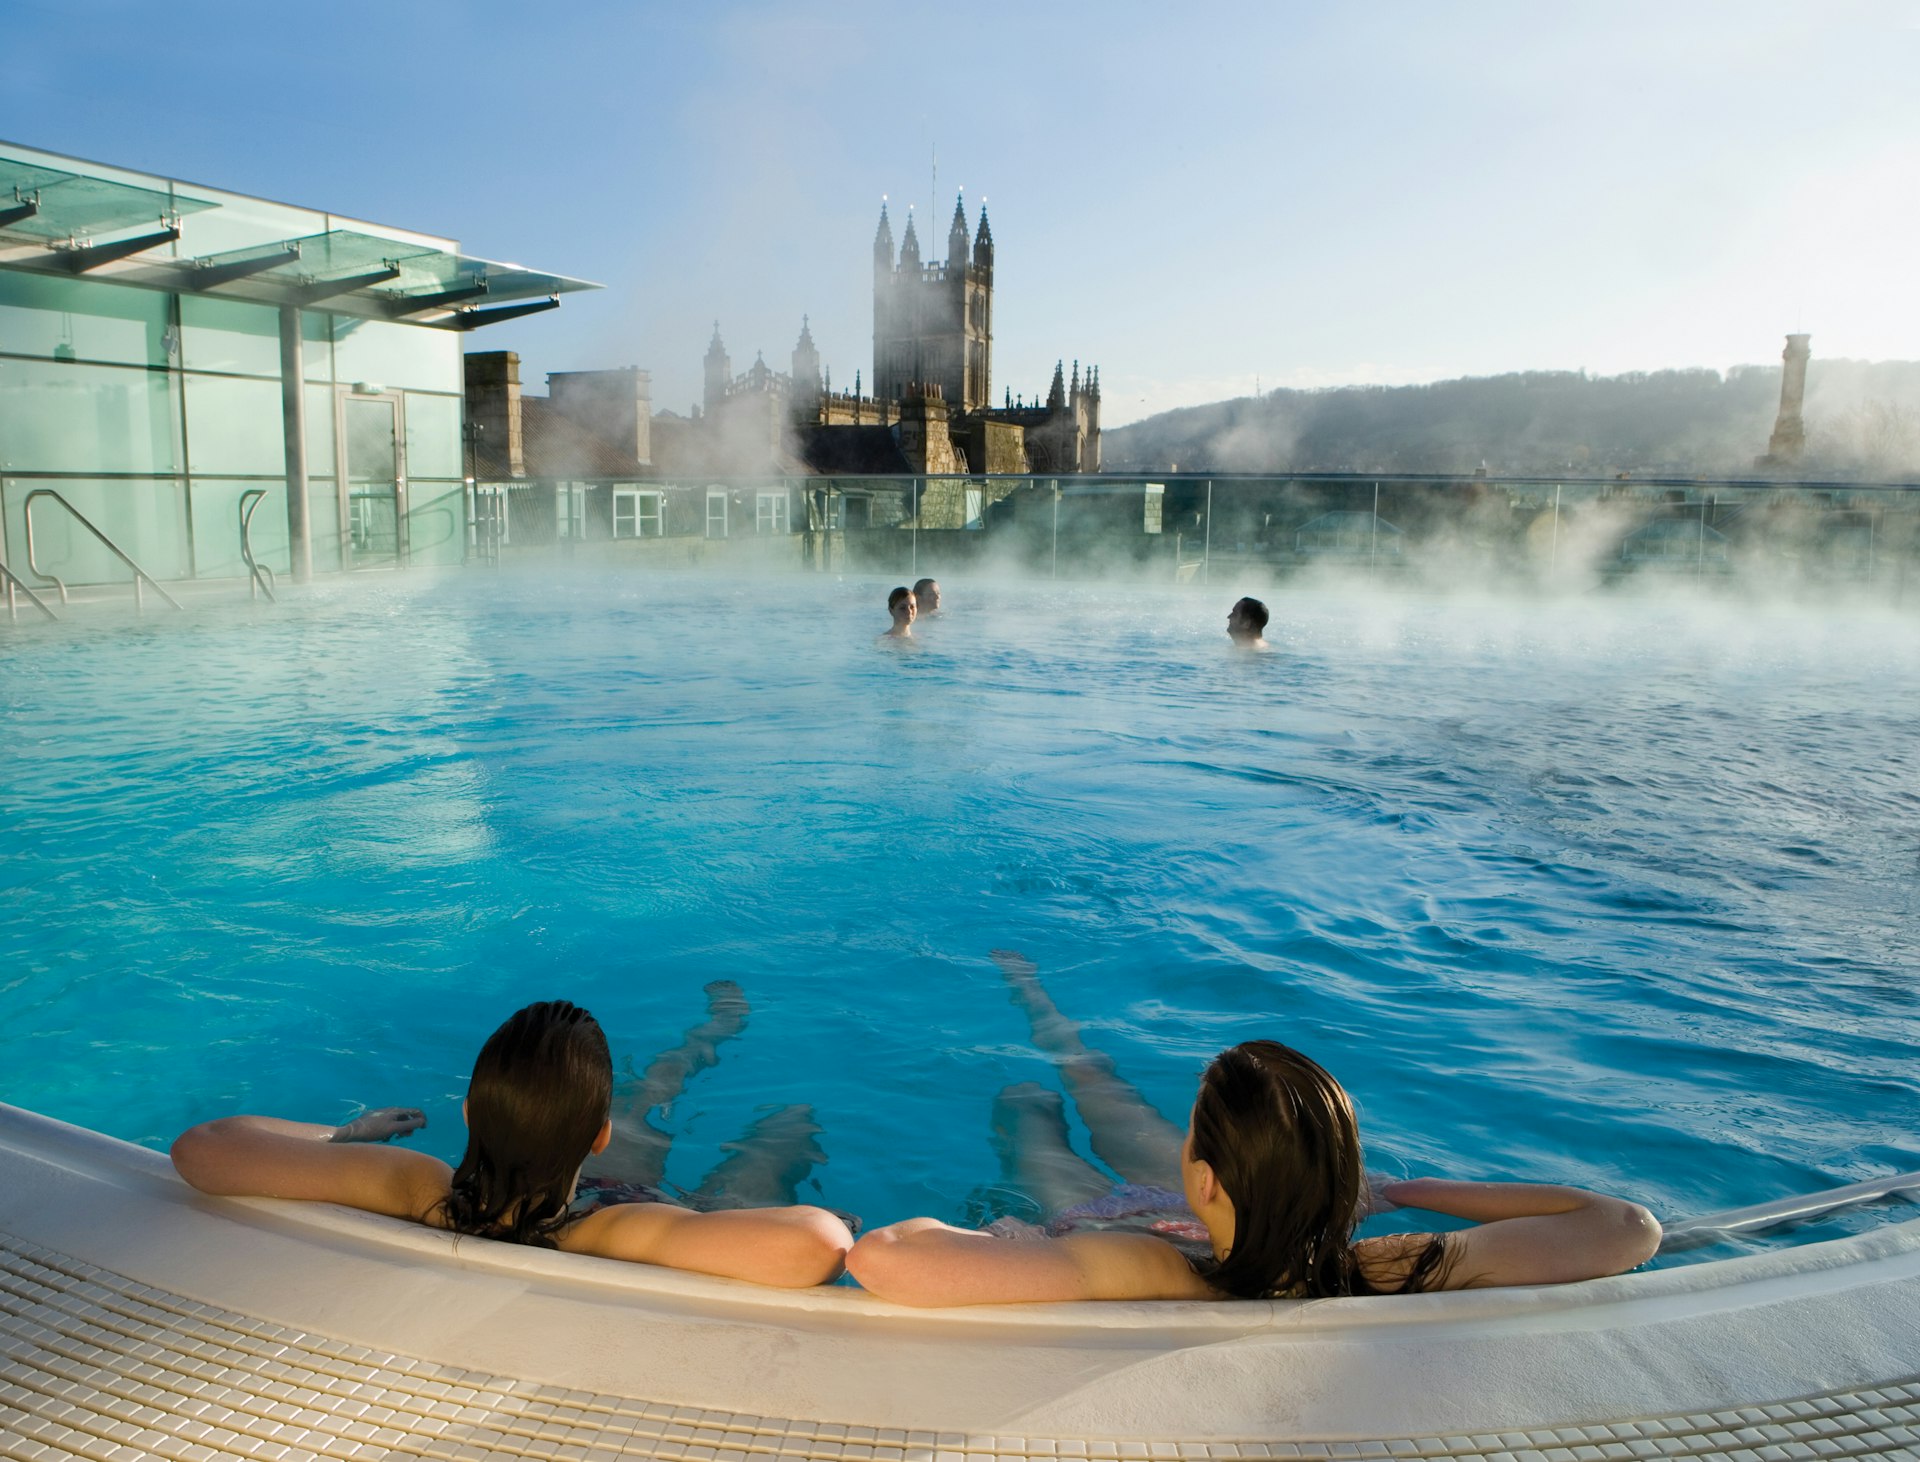 Two people lounge on the edge of a rooftop swimming pool with their backs to the camera. Steam rises from the water. A cathedral building is in silhouette in the distance